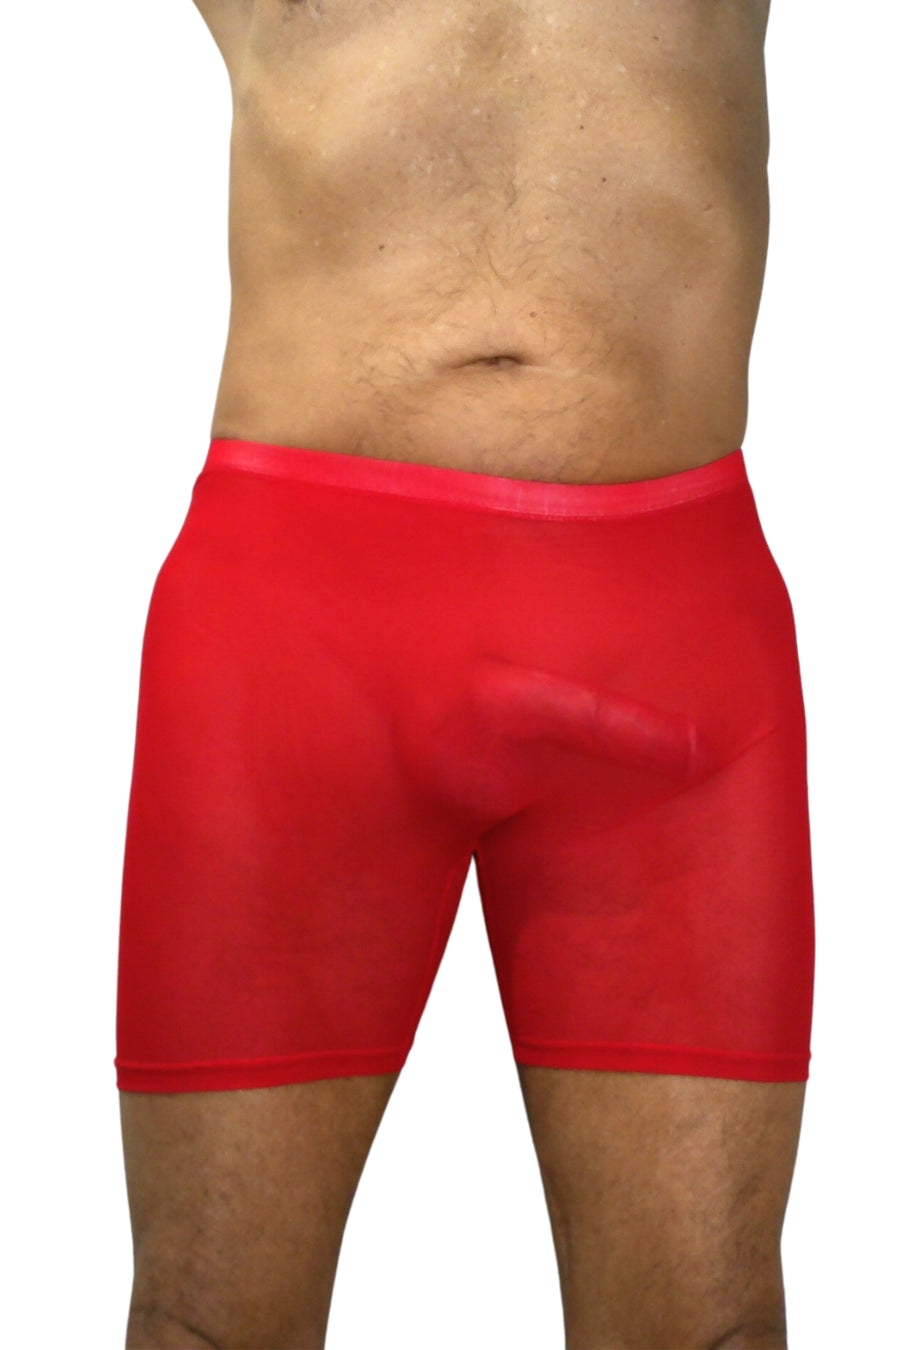 Bodywear for Men Ultra Sheer High Waist Boxer Shorts #BfM-1042 made from a fine poly blend sheer material. Our Sheer Boxer shorts sit high on your waist, 4' long legs, seamless front with a center seamed rear in Red